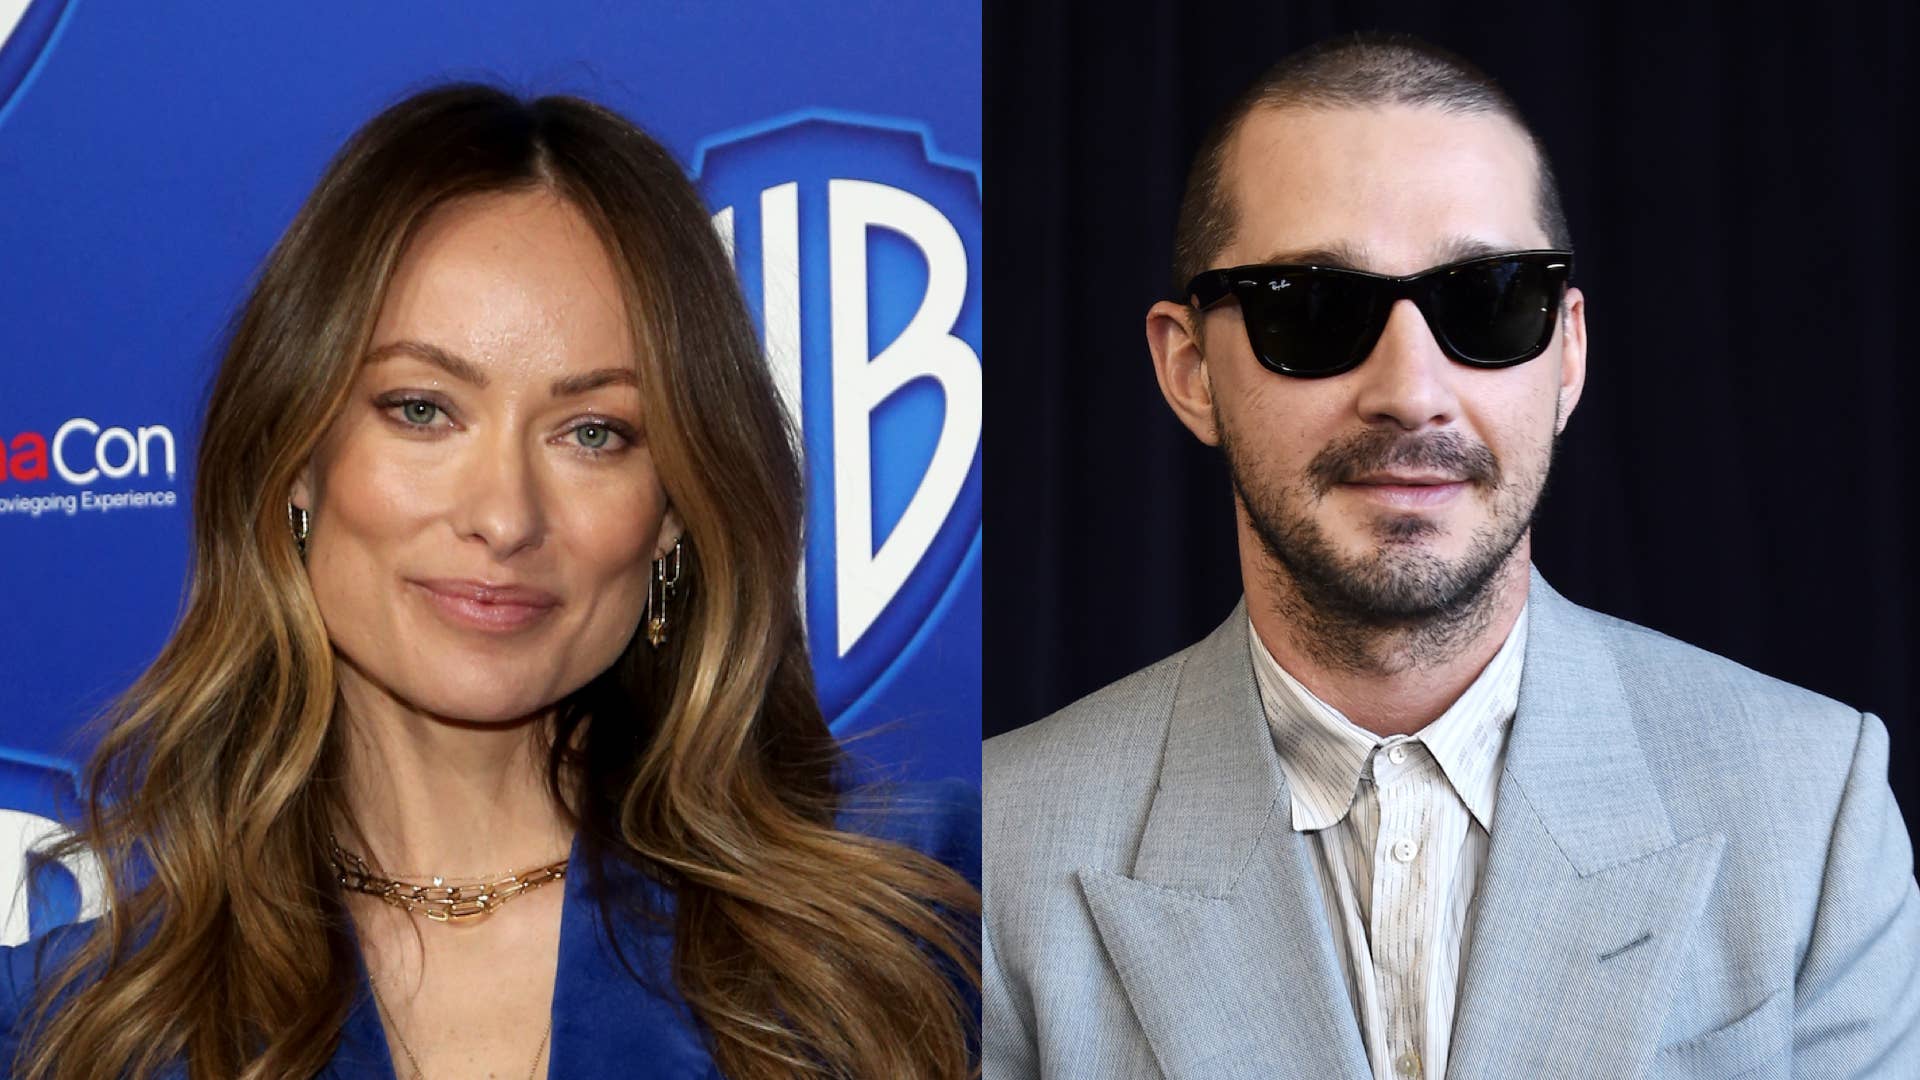 Actor Shia LaBeouf and Director and actress Olivia Wilde